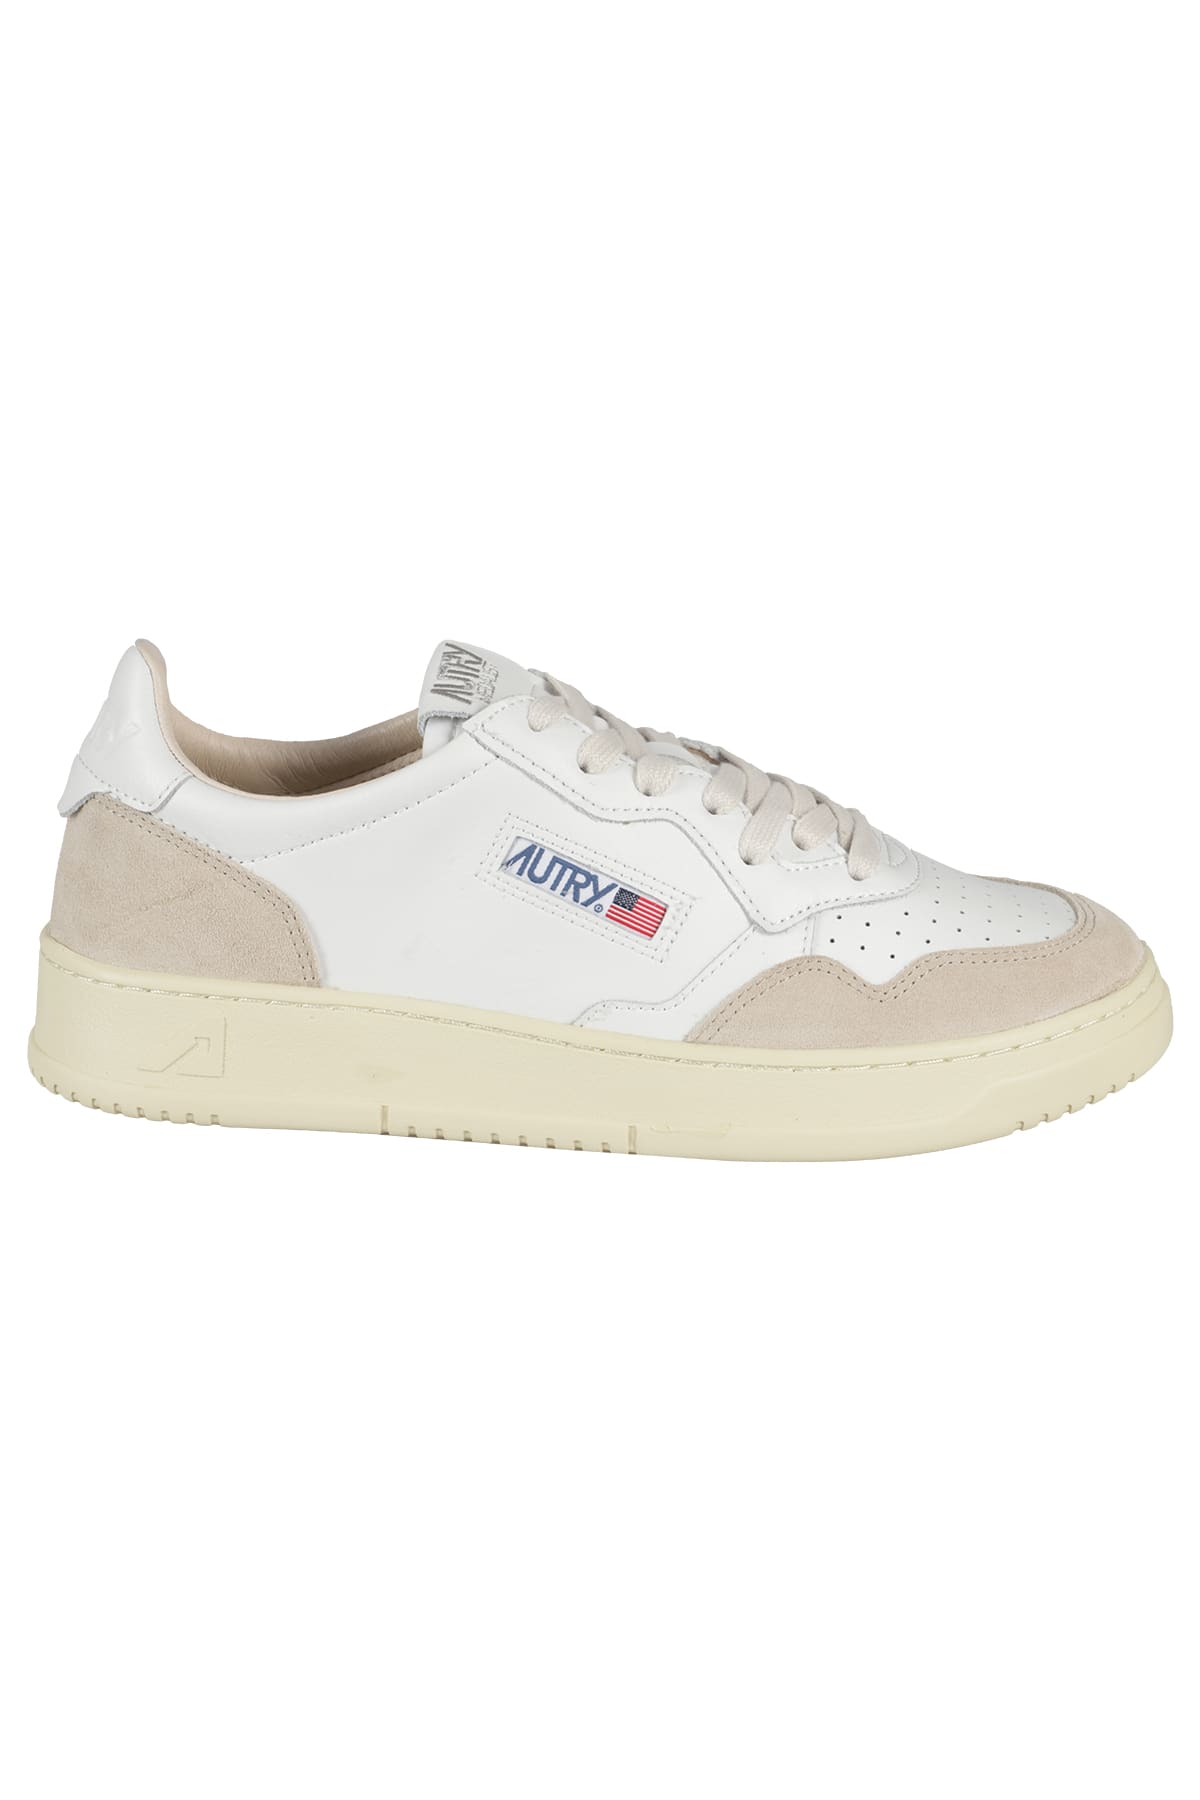 Shop Autry Medalist Low Man In Suede White